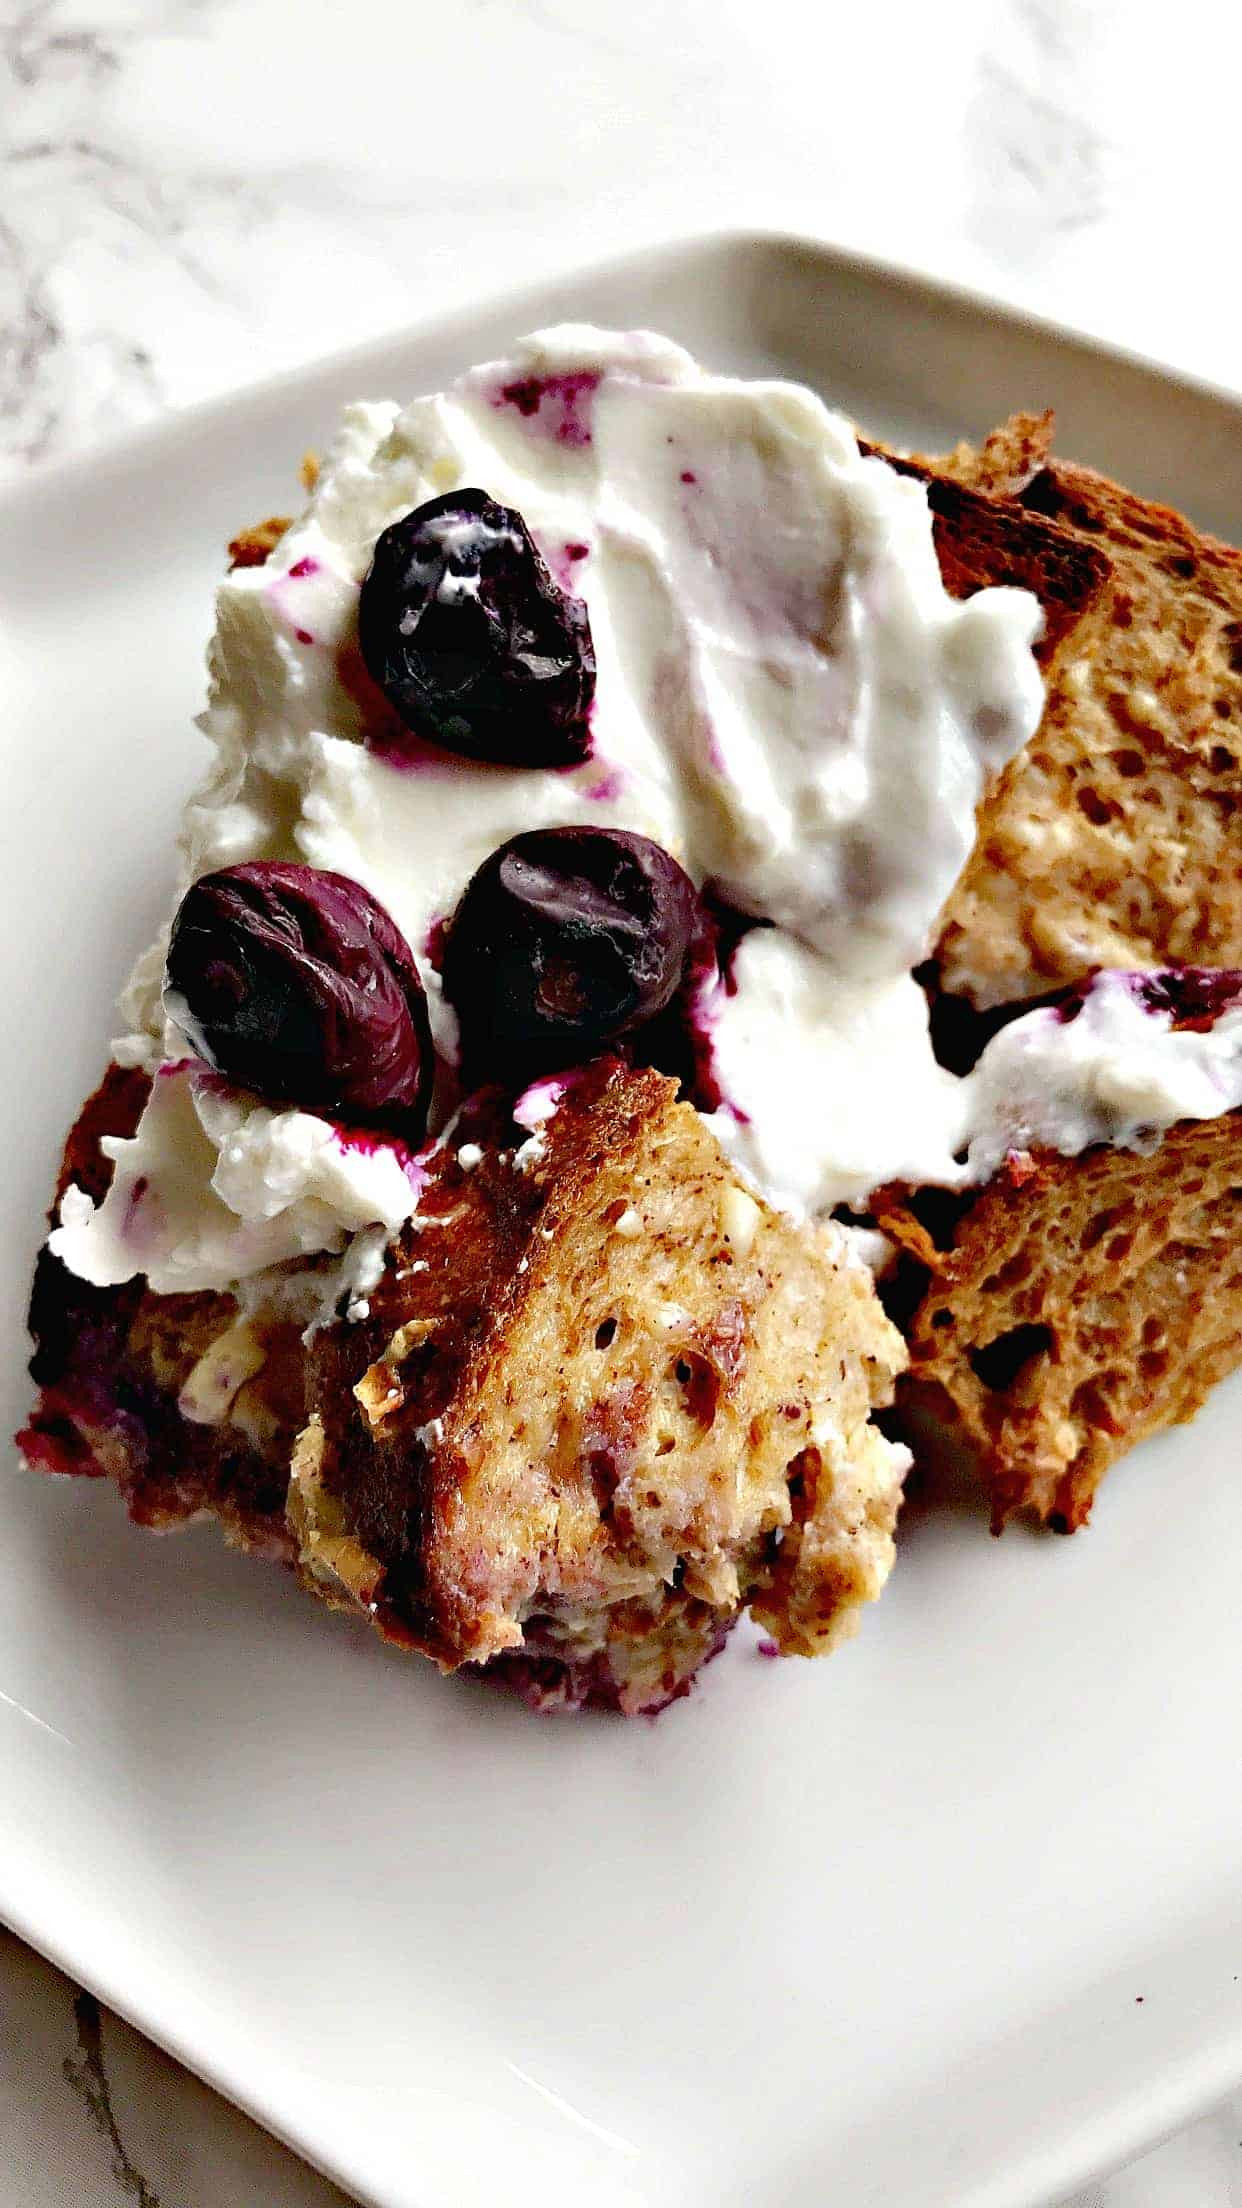 Blueberry Cream Cheese French Toast
 Baked Blueberry and Cream Cheese French Toast